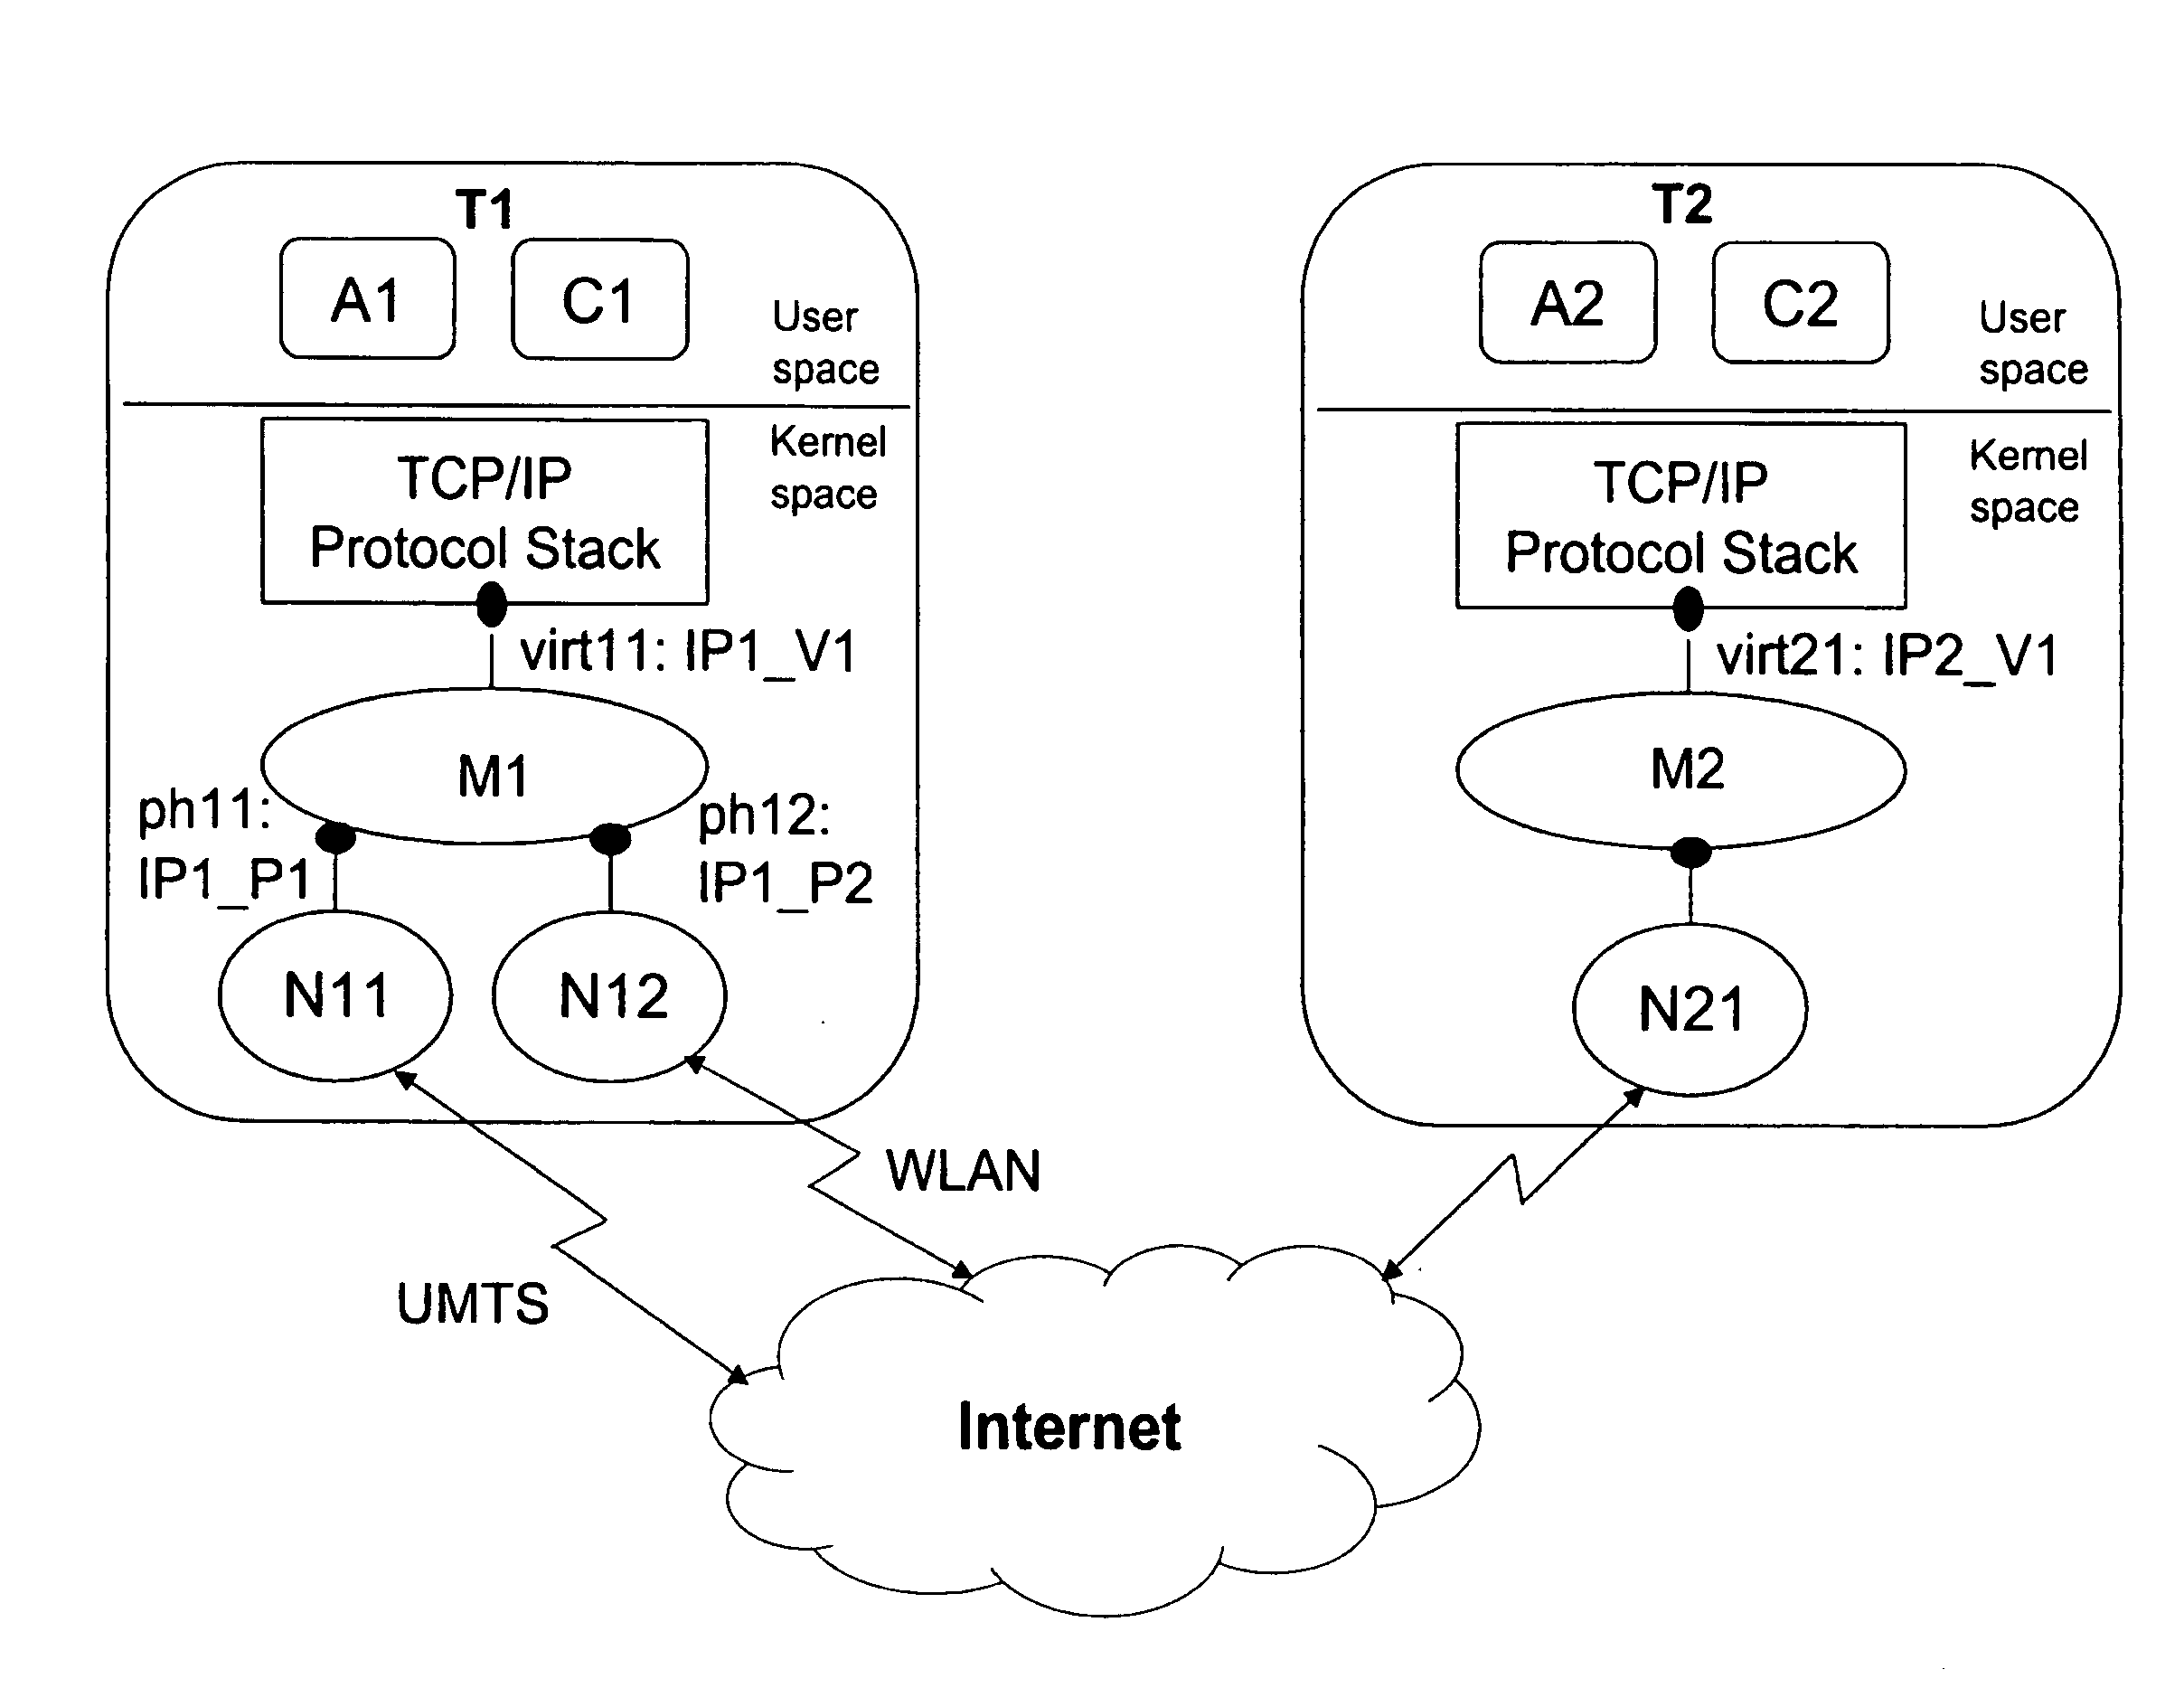 Management of seamless handover between different communication systems in an IP dual-mode terminal